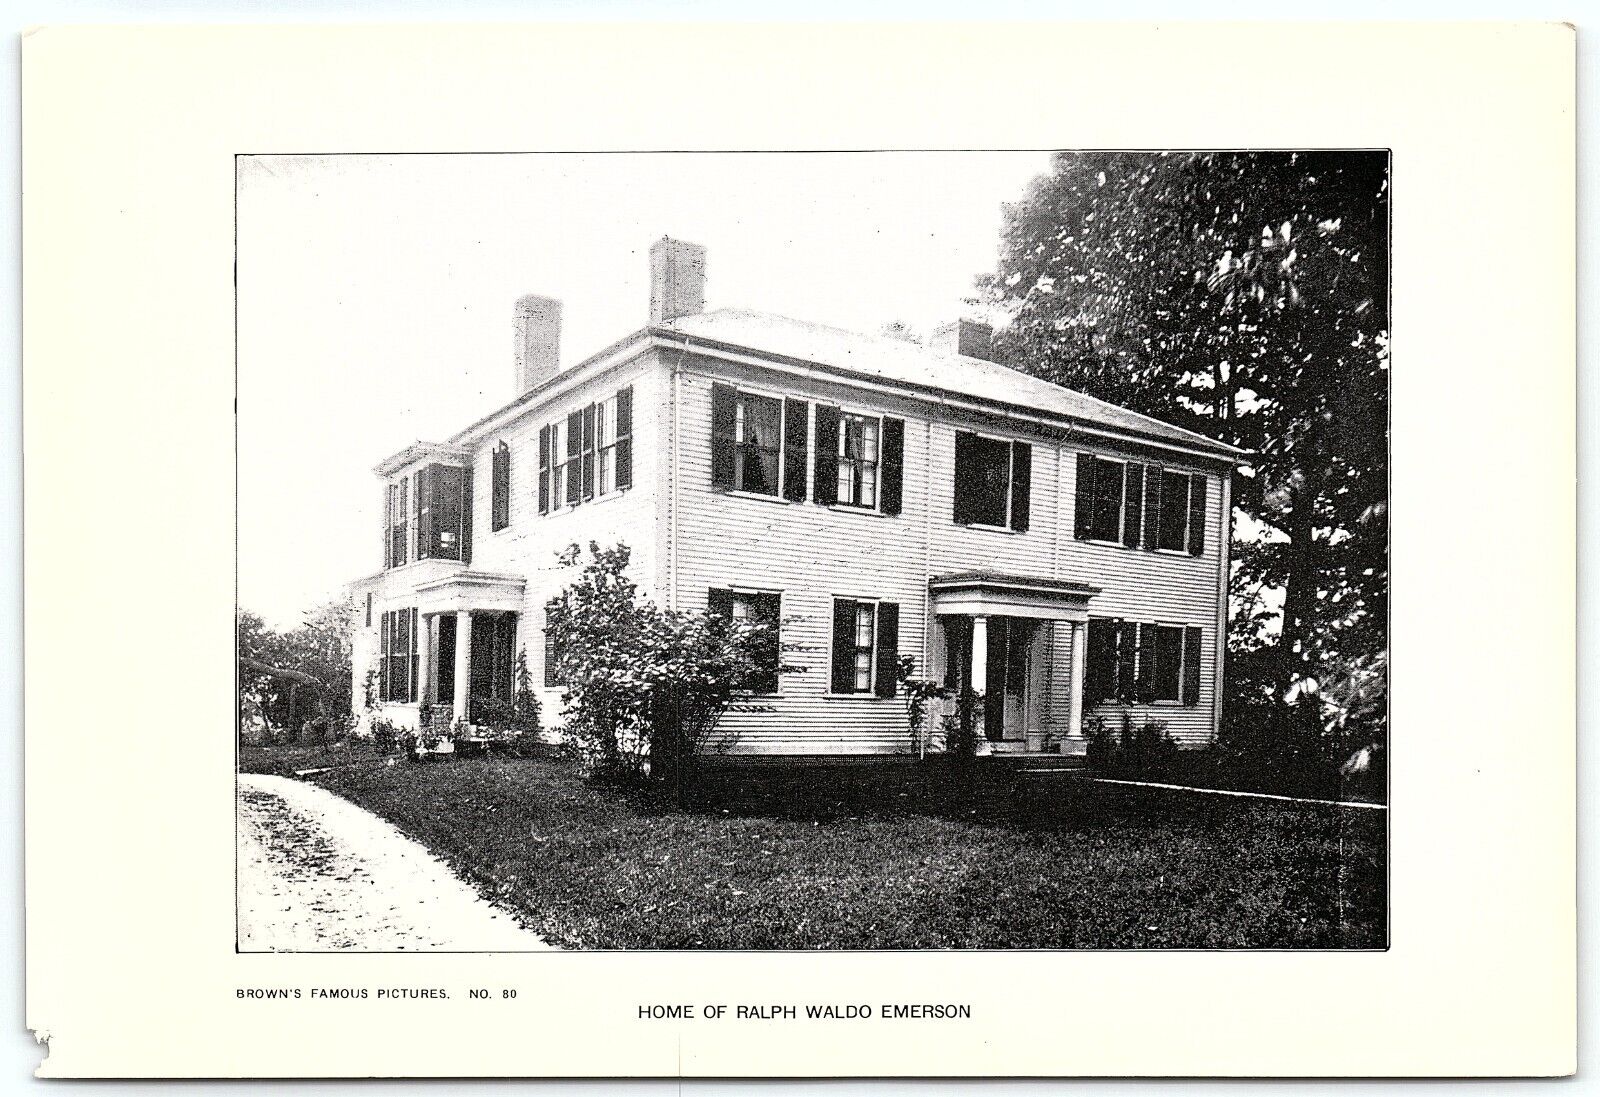 c1900 HOME OF RALPH WALDO EMERSON BROWN'S FAMOUS PICTURES 8 X 5.5 PRINT Z5554